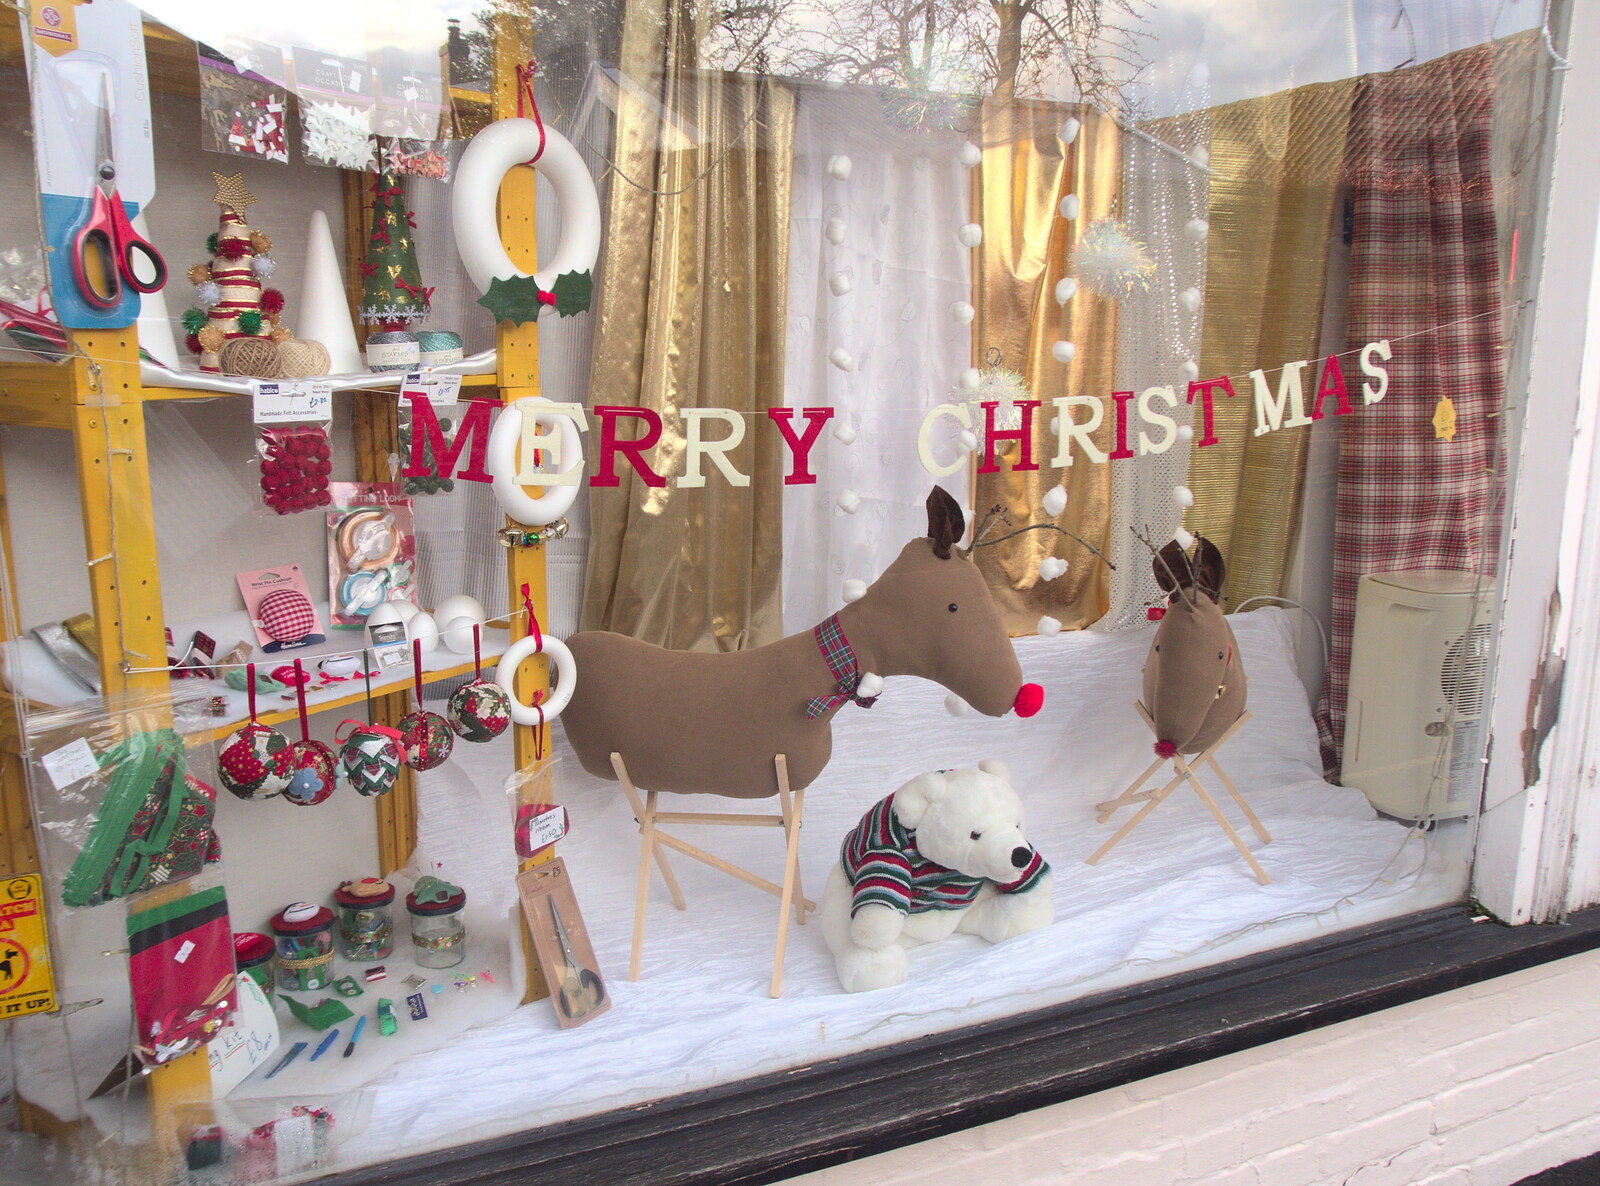 The Fabric Shop has a Christmas display in the window from Christmas Shopping in Norwich, Norfolk - 21st December 2022